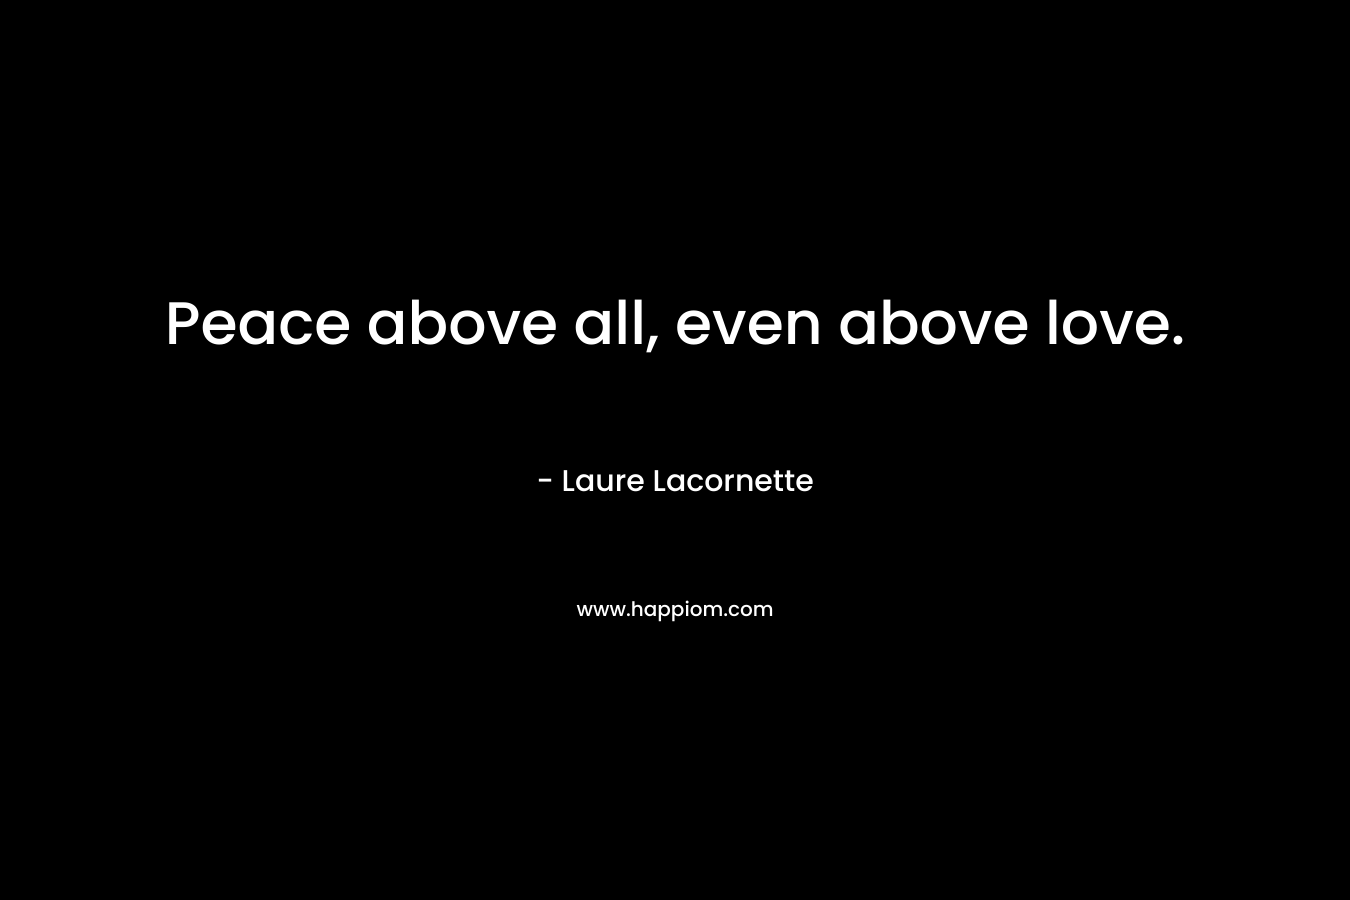 Peace above all, even above love.